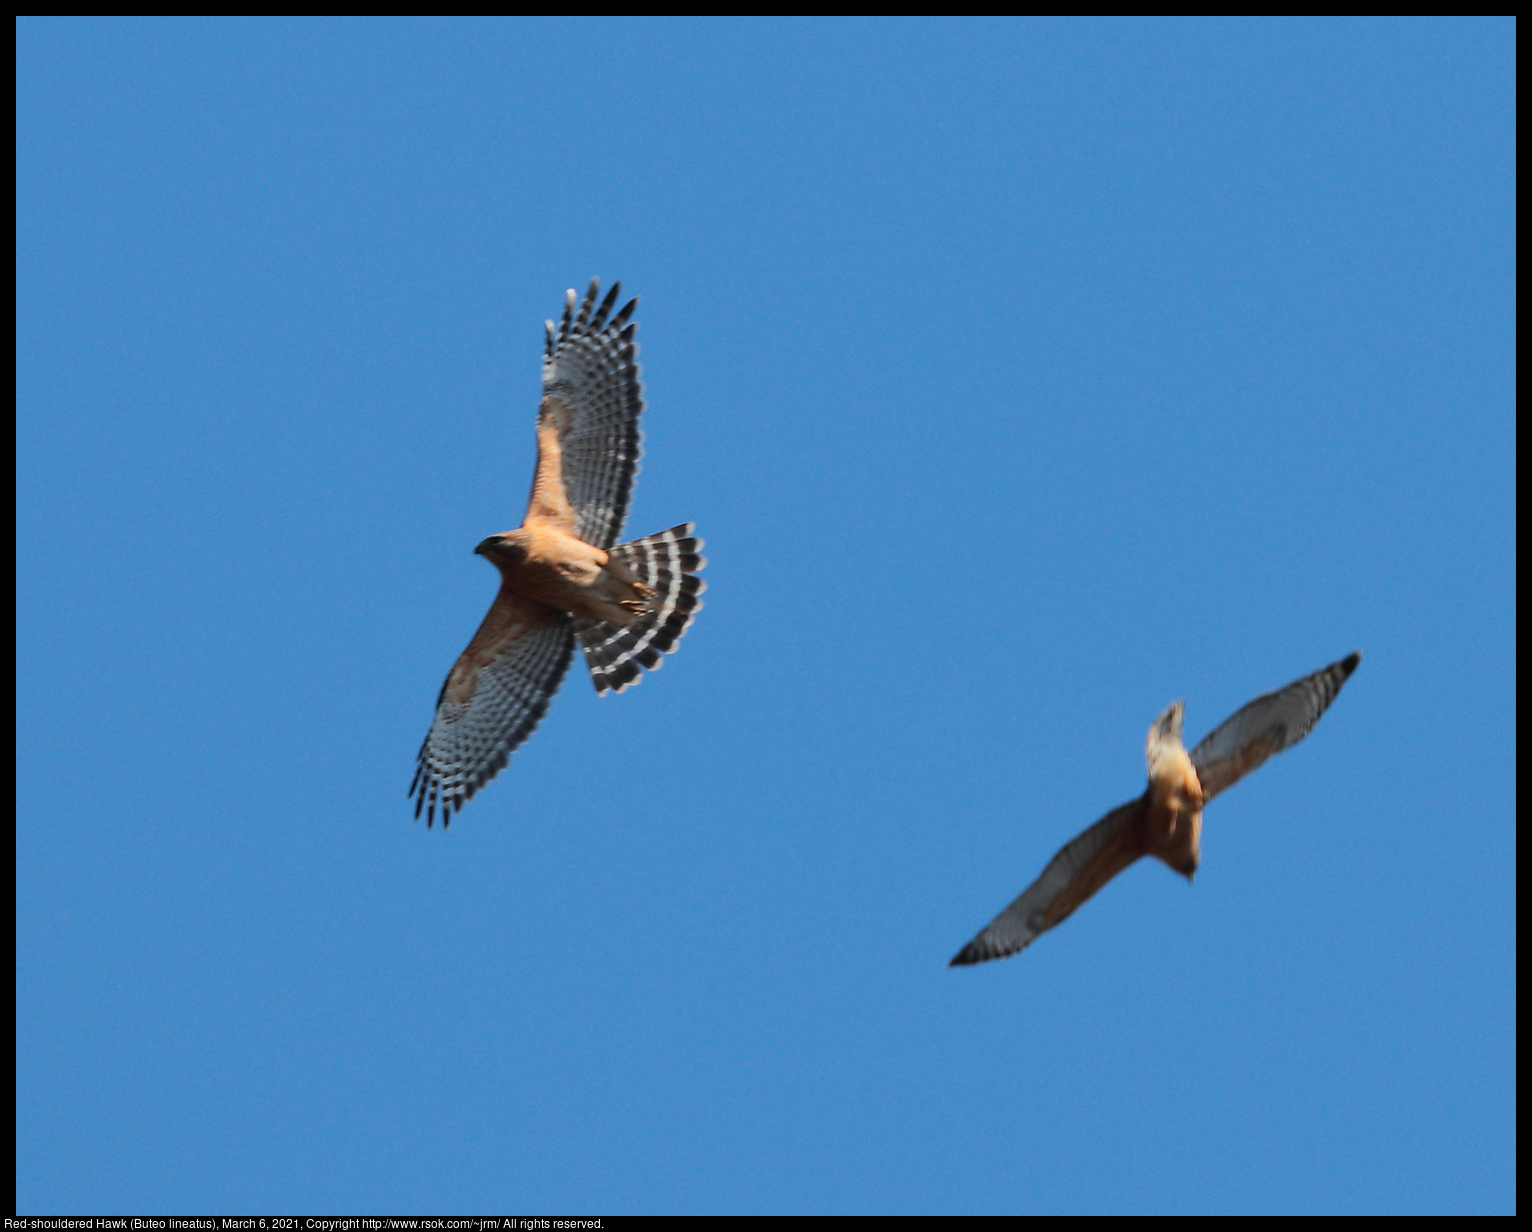 Red-shouldered Hawk (Buteo lineatus), March 6, 2021